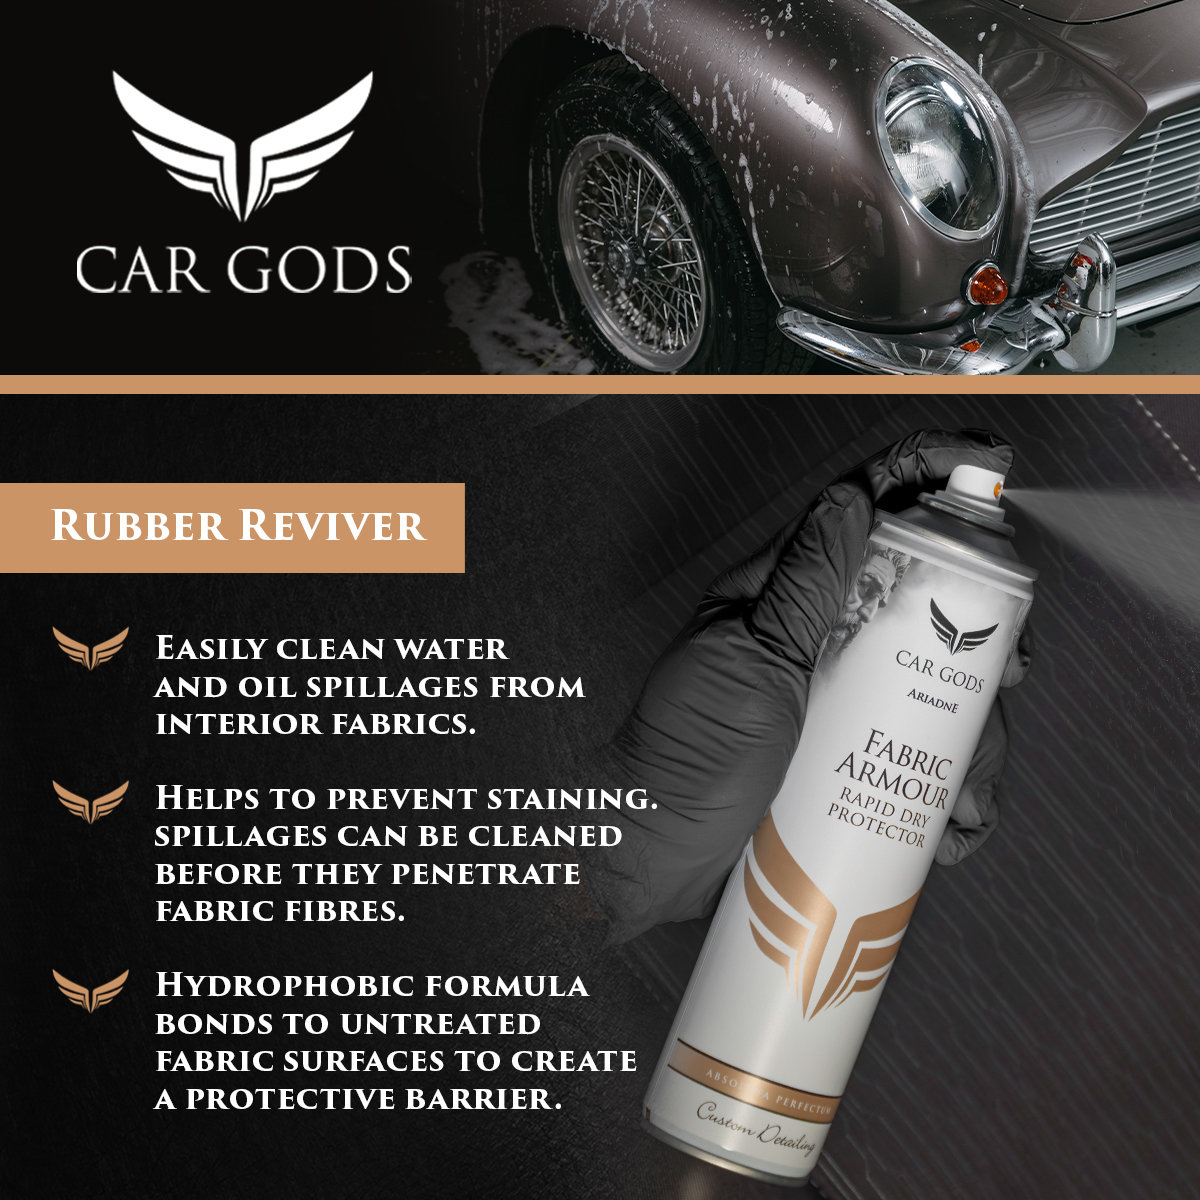 Car Gods Fabric Armour Rapid Dry Protector. Effortlessly protect your car’s fabric interior with a hydrophobic formula bonds to untreated fabric surfaces to create a protective barrier. Helps to prevent staining and aids in easier clean up of water and oil spillages from interior fabrics.